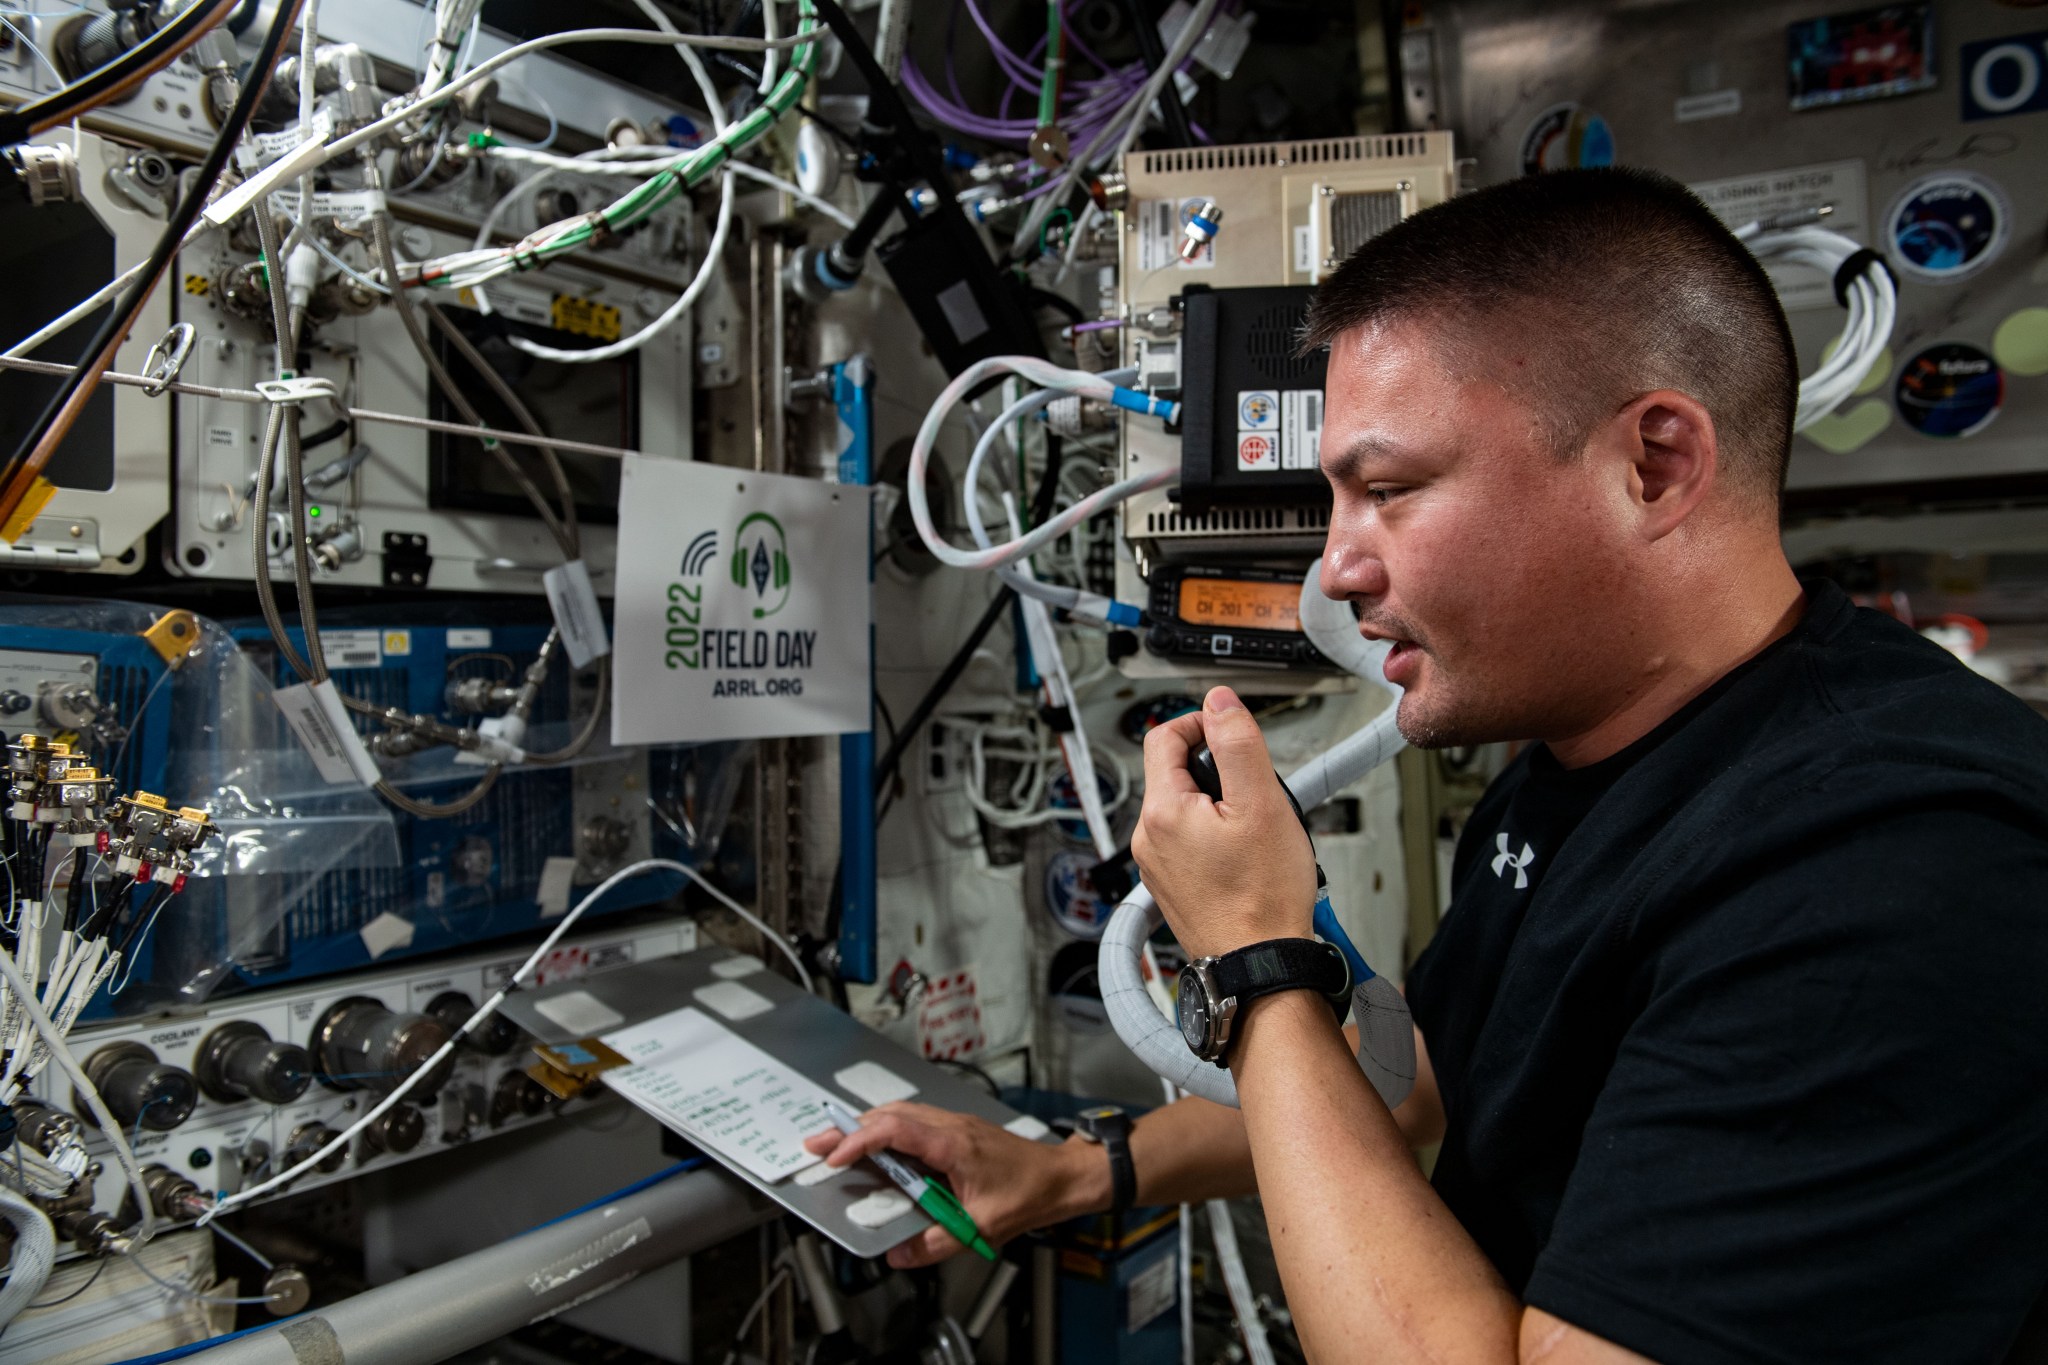 Astronaut Kjell Lindgren, wearing a black shirt, faces the control panel of the station’s ham radio set. He is holding a notepad and pen in his right hand and speaking into the microphone in his left hand.